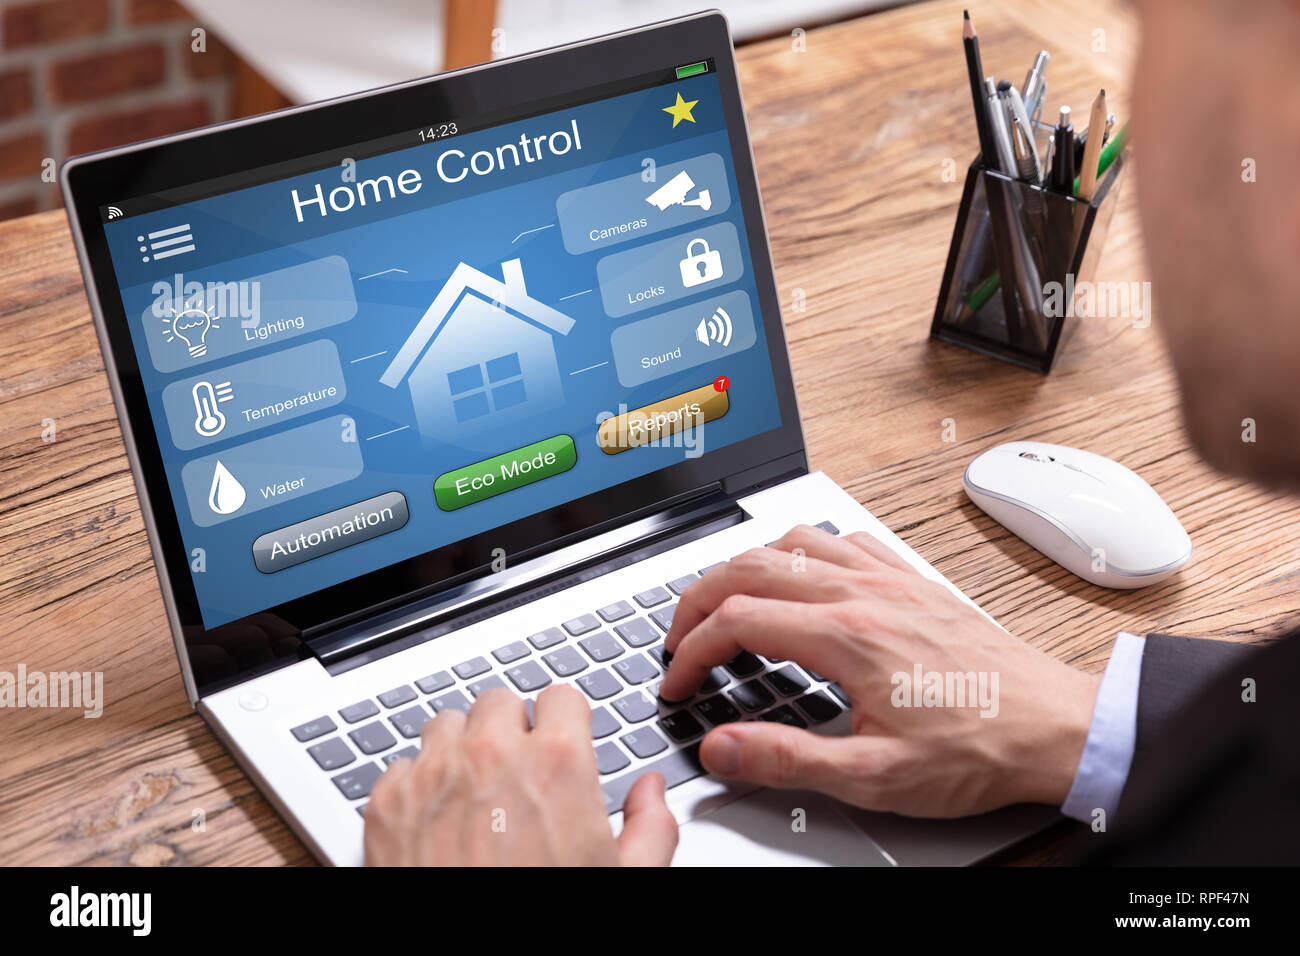 Person's Using Laptop With Home Control Application Stock Photo